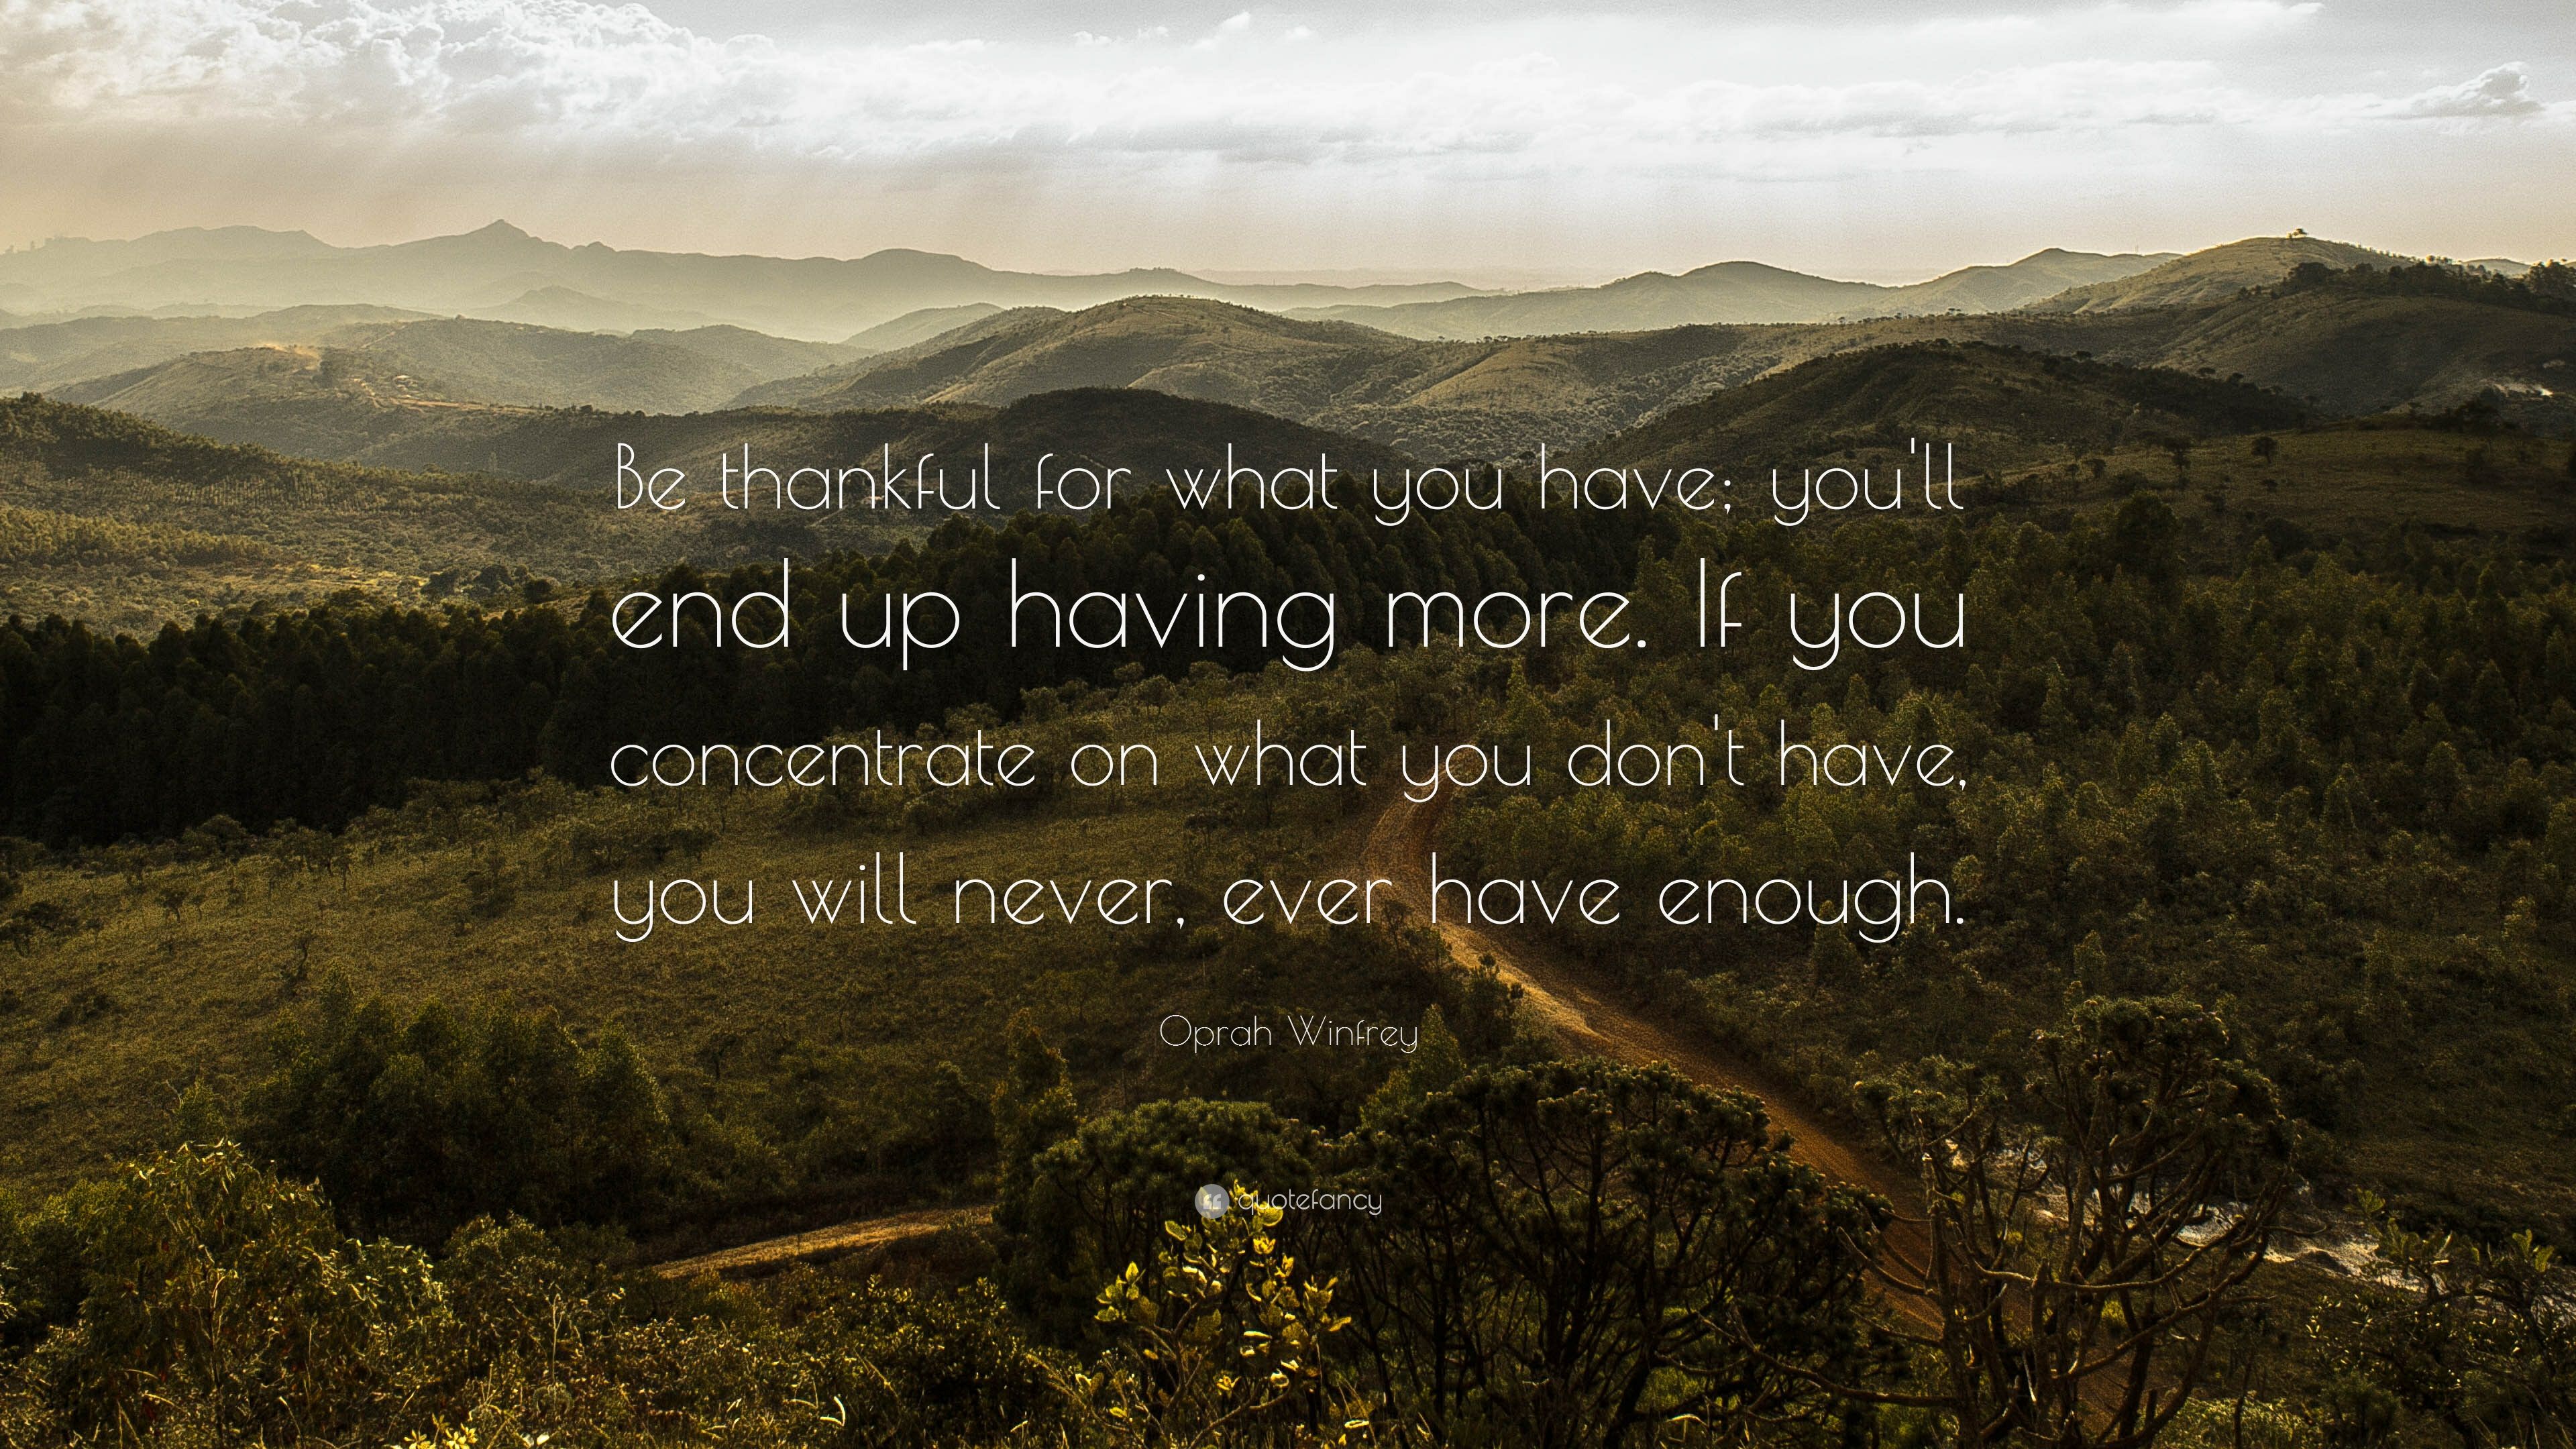 Oprah Winfrey Quote: “Be thankful for what you have; you'll end up